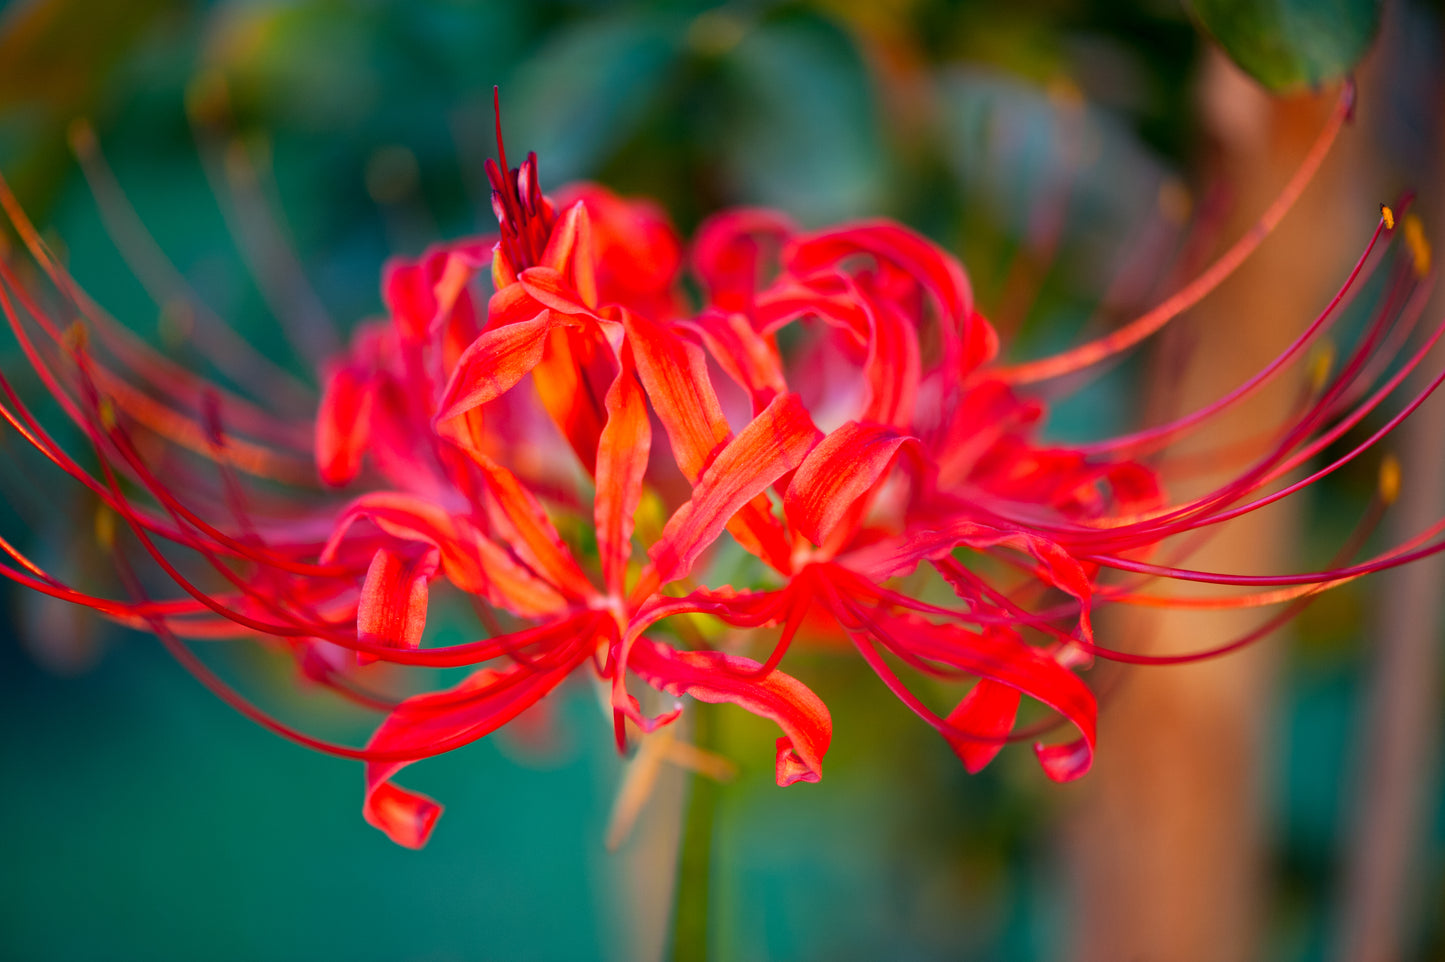 Spider Lily's Fireworks